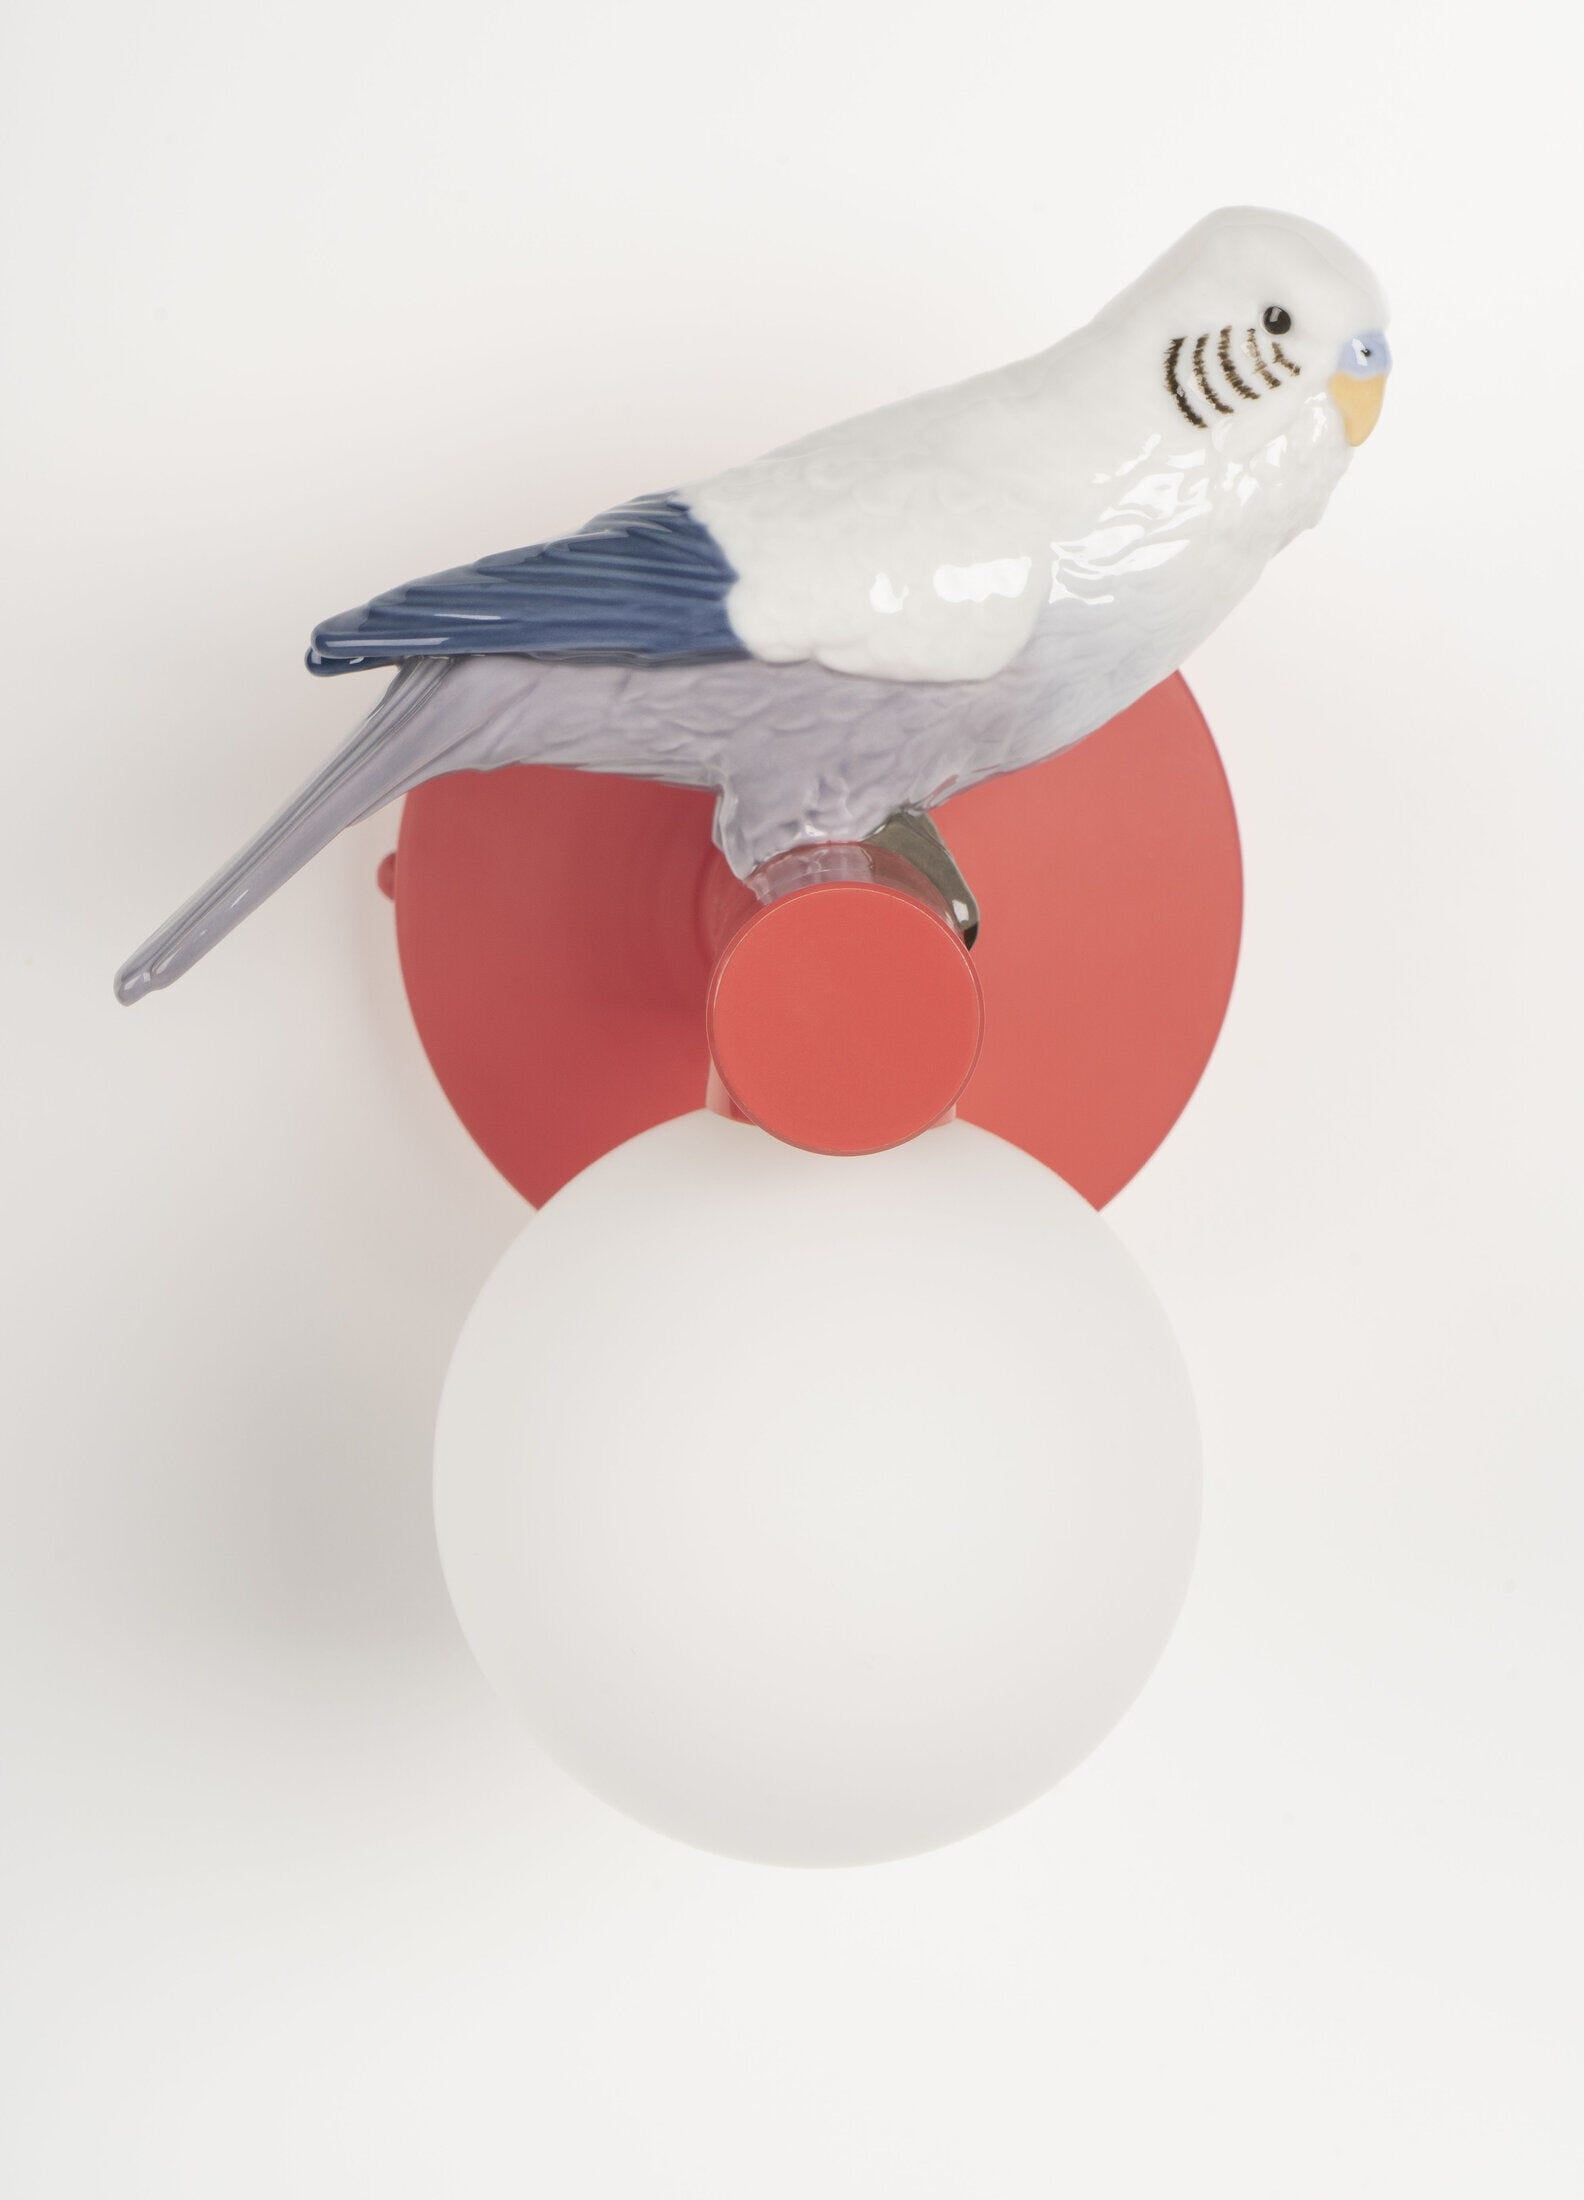 Parrot Party Wall Lamp - FormFluent